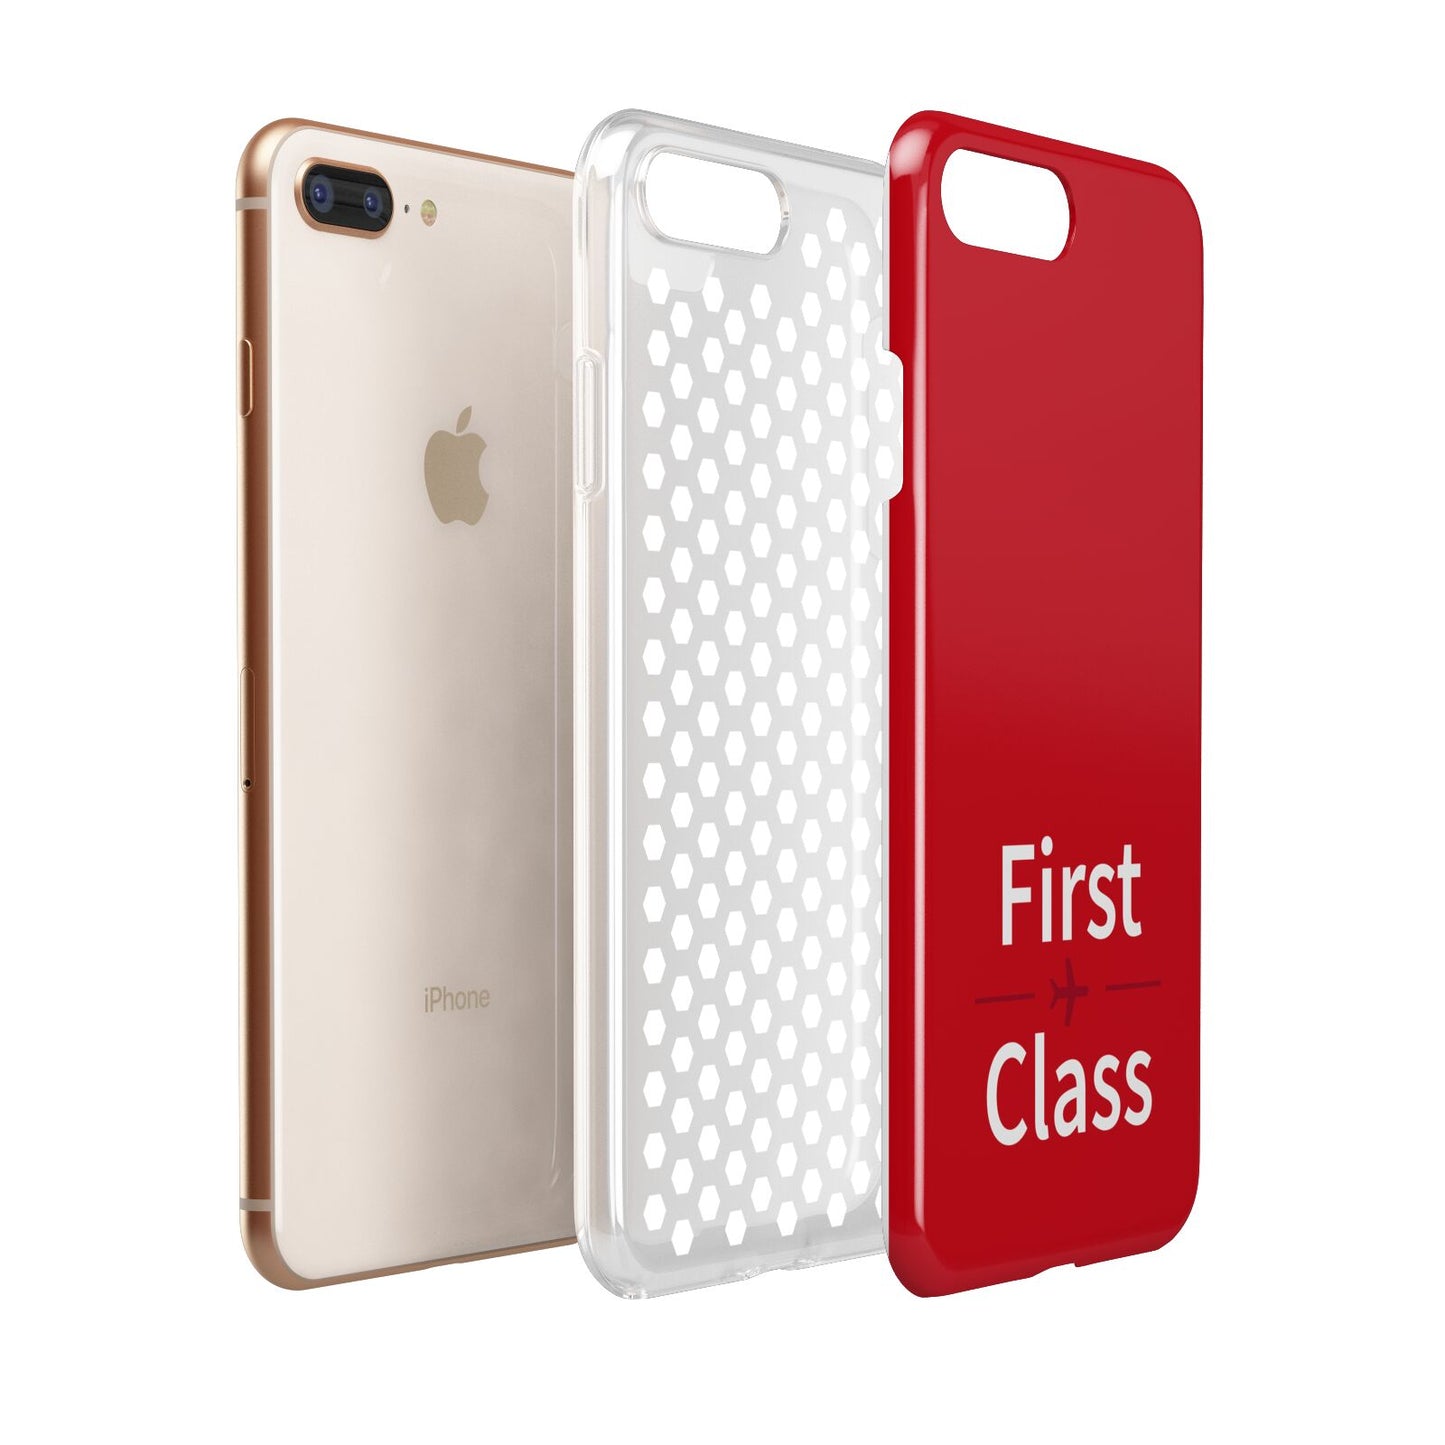 First Class Apple iPhone 7 8 Plus 3D Tough Case Expanded View